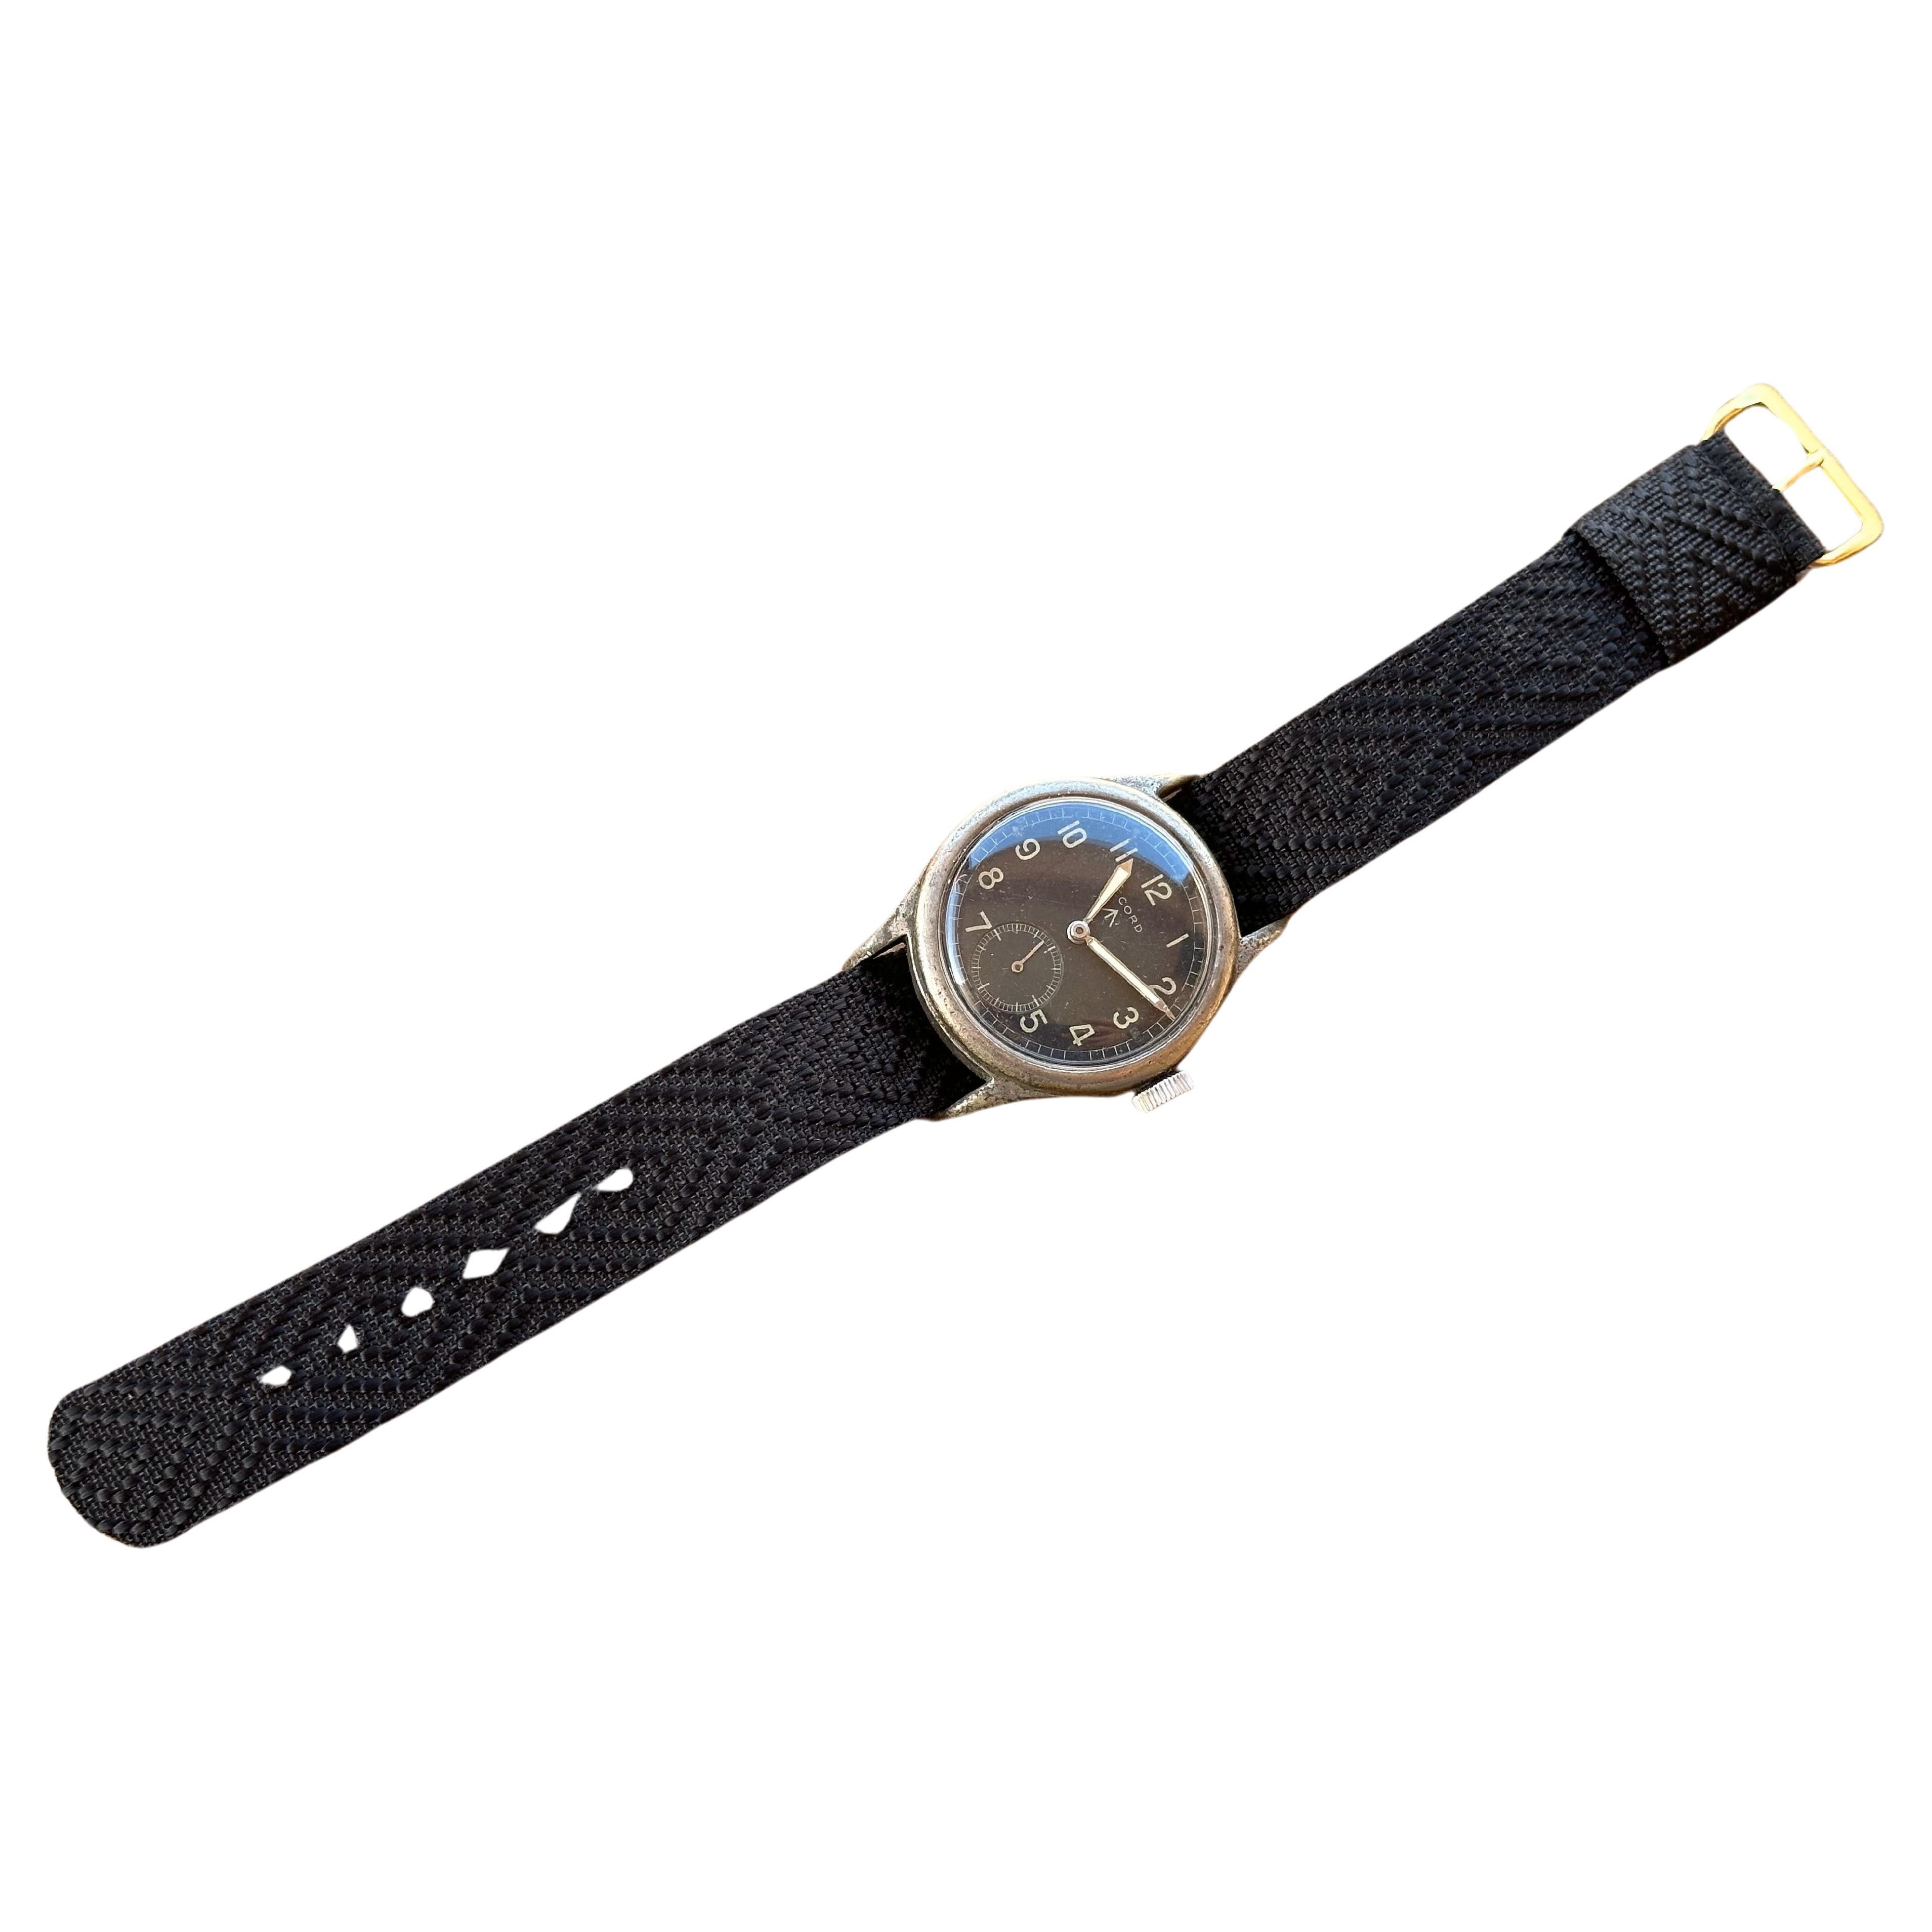 Record Military Issued Dirty Dozen Watch - WWW L33573 Watch.